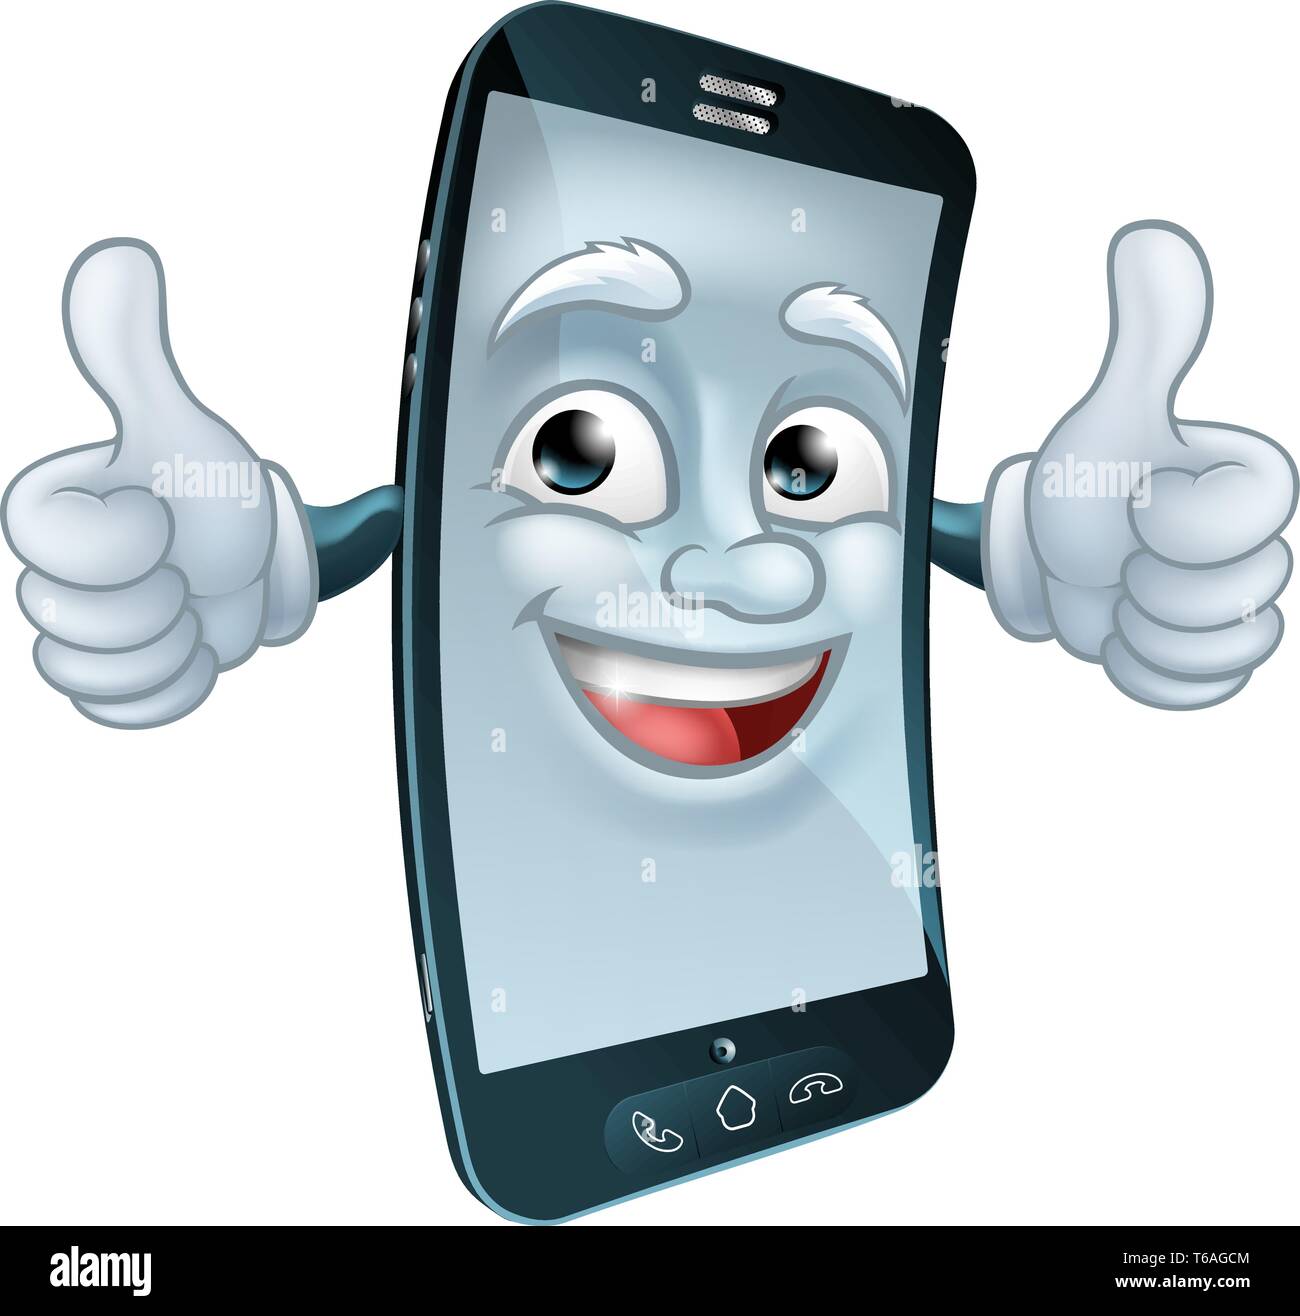 Mobile Cell Phone Mascot Cartoon Character Stock Vector